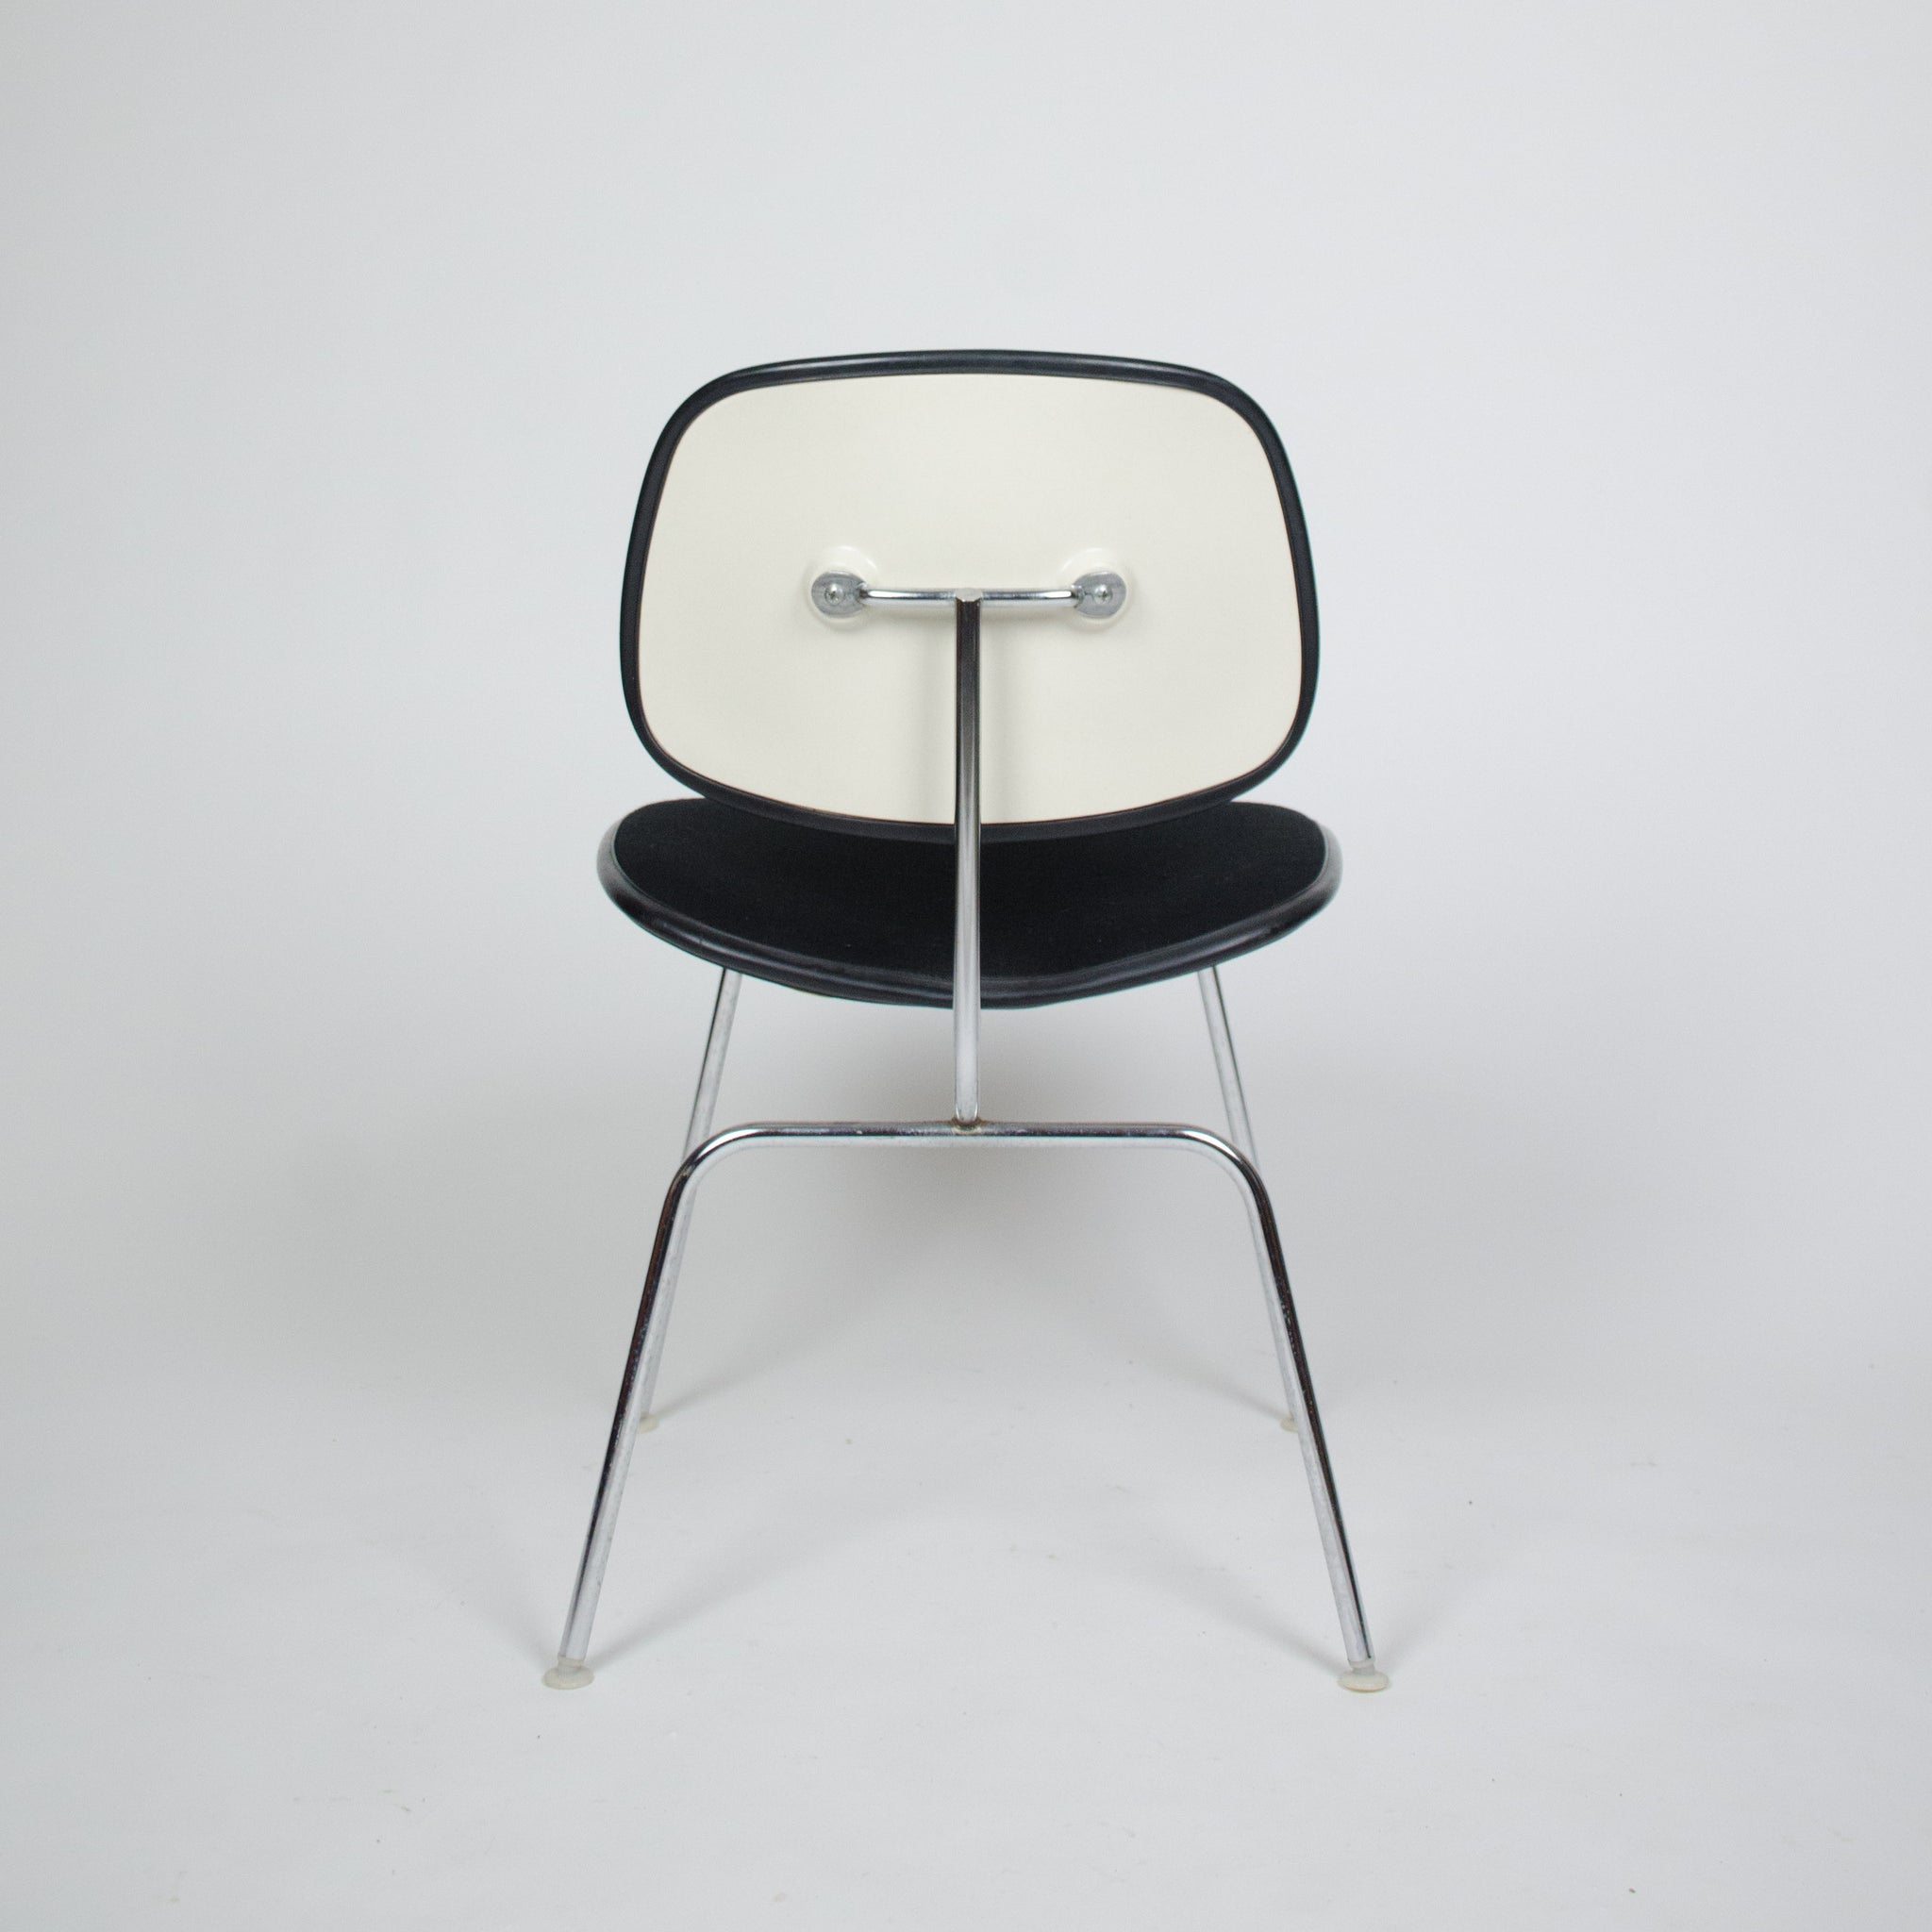 SOLD Eames Herman Miller Upholstered Alexander Girard DCM Chairs 1970s 4 Available